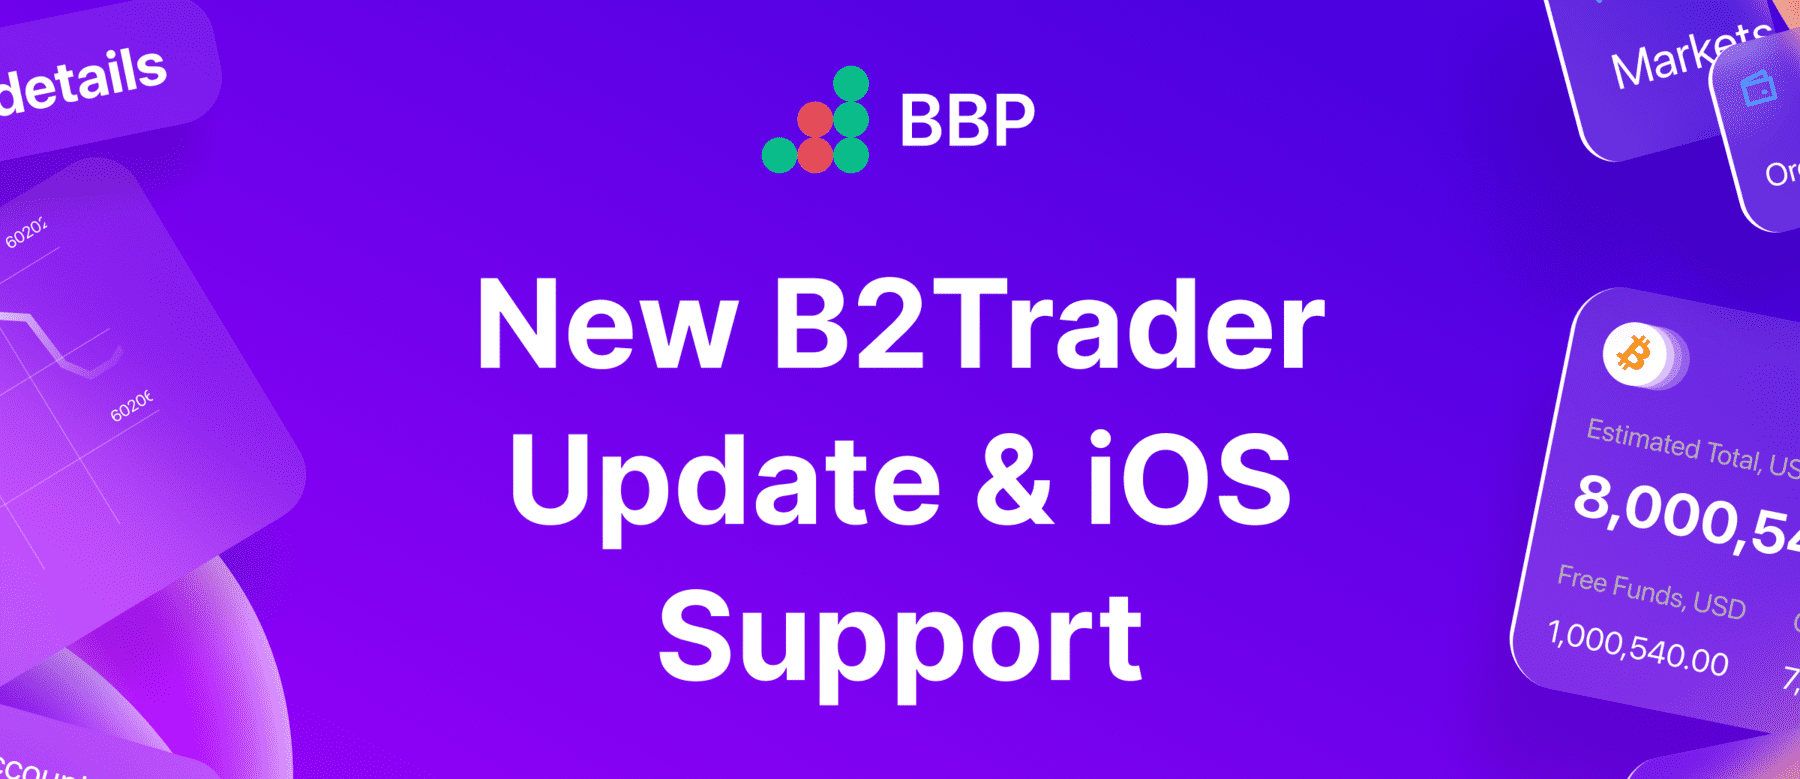 Introducing B2Trader v1.1: BBP Prime, Enhanced Reporting & Customisation, and iOS Support